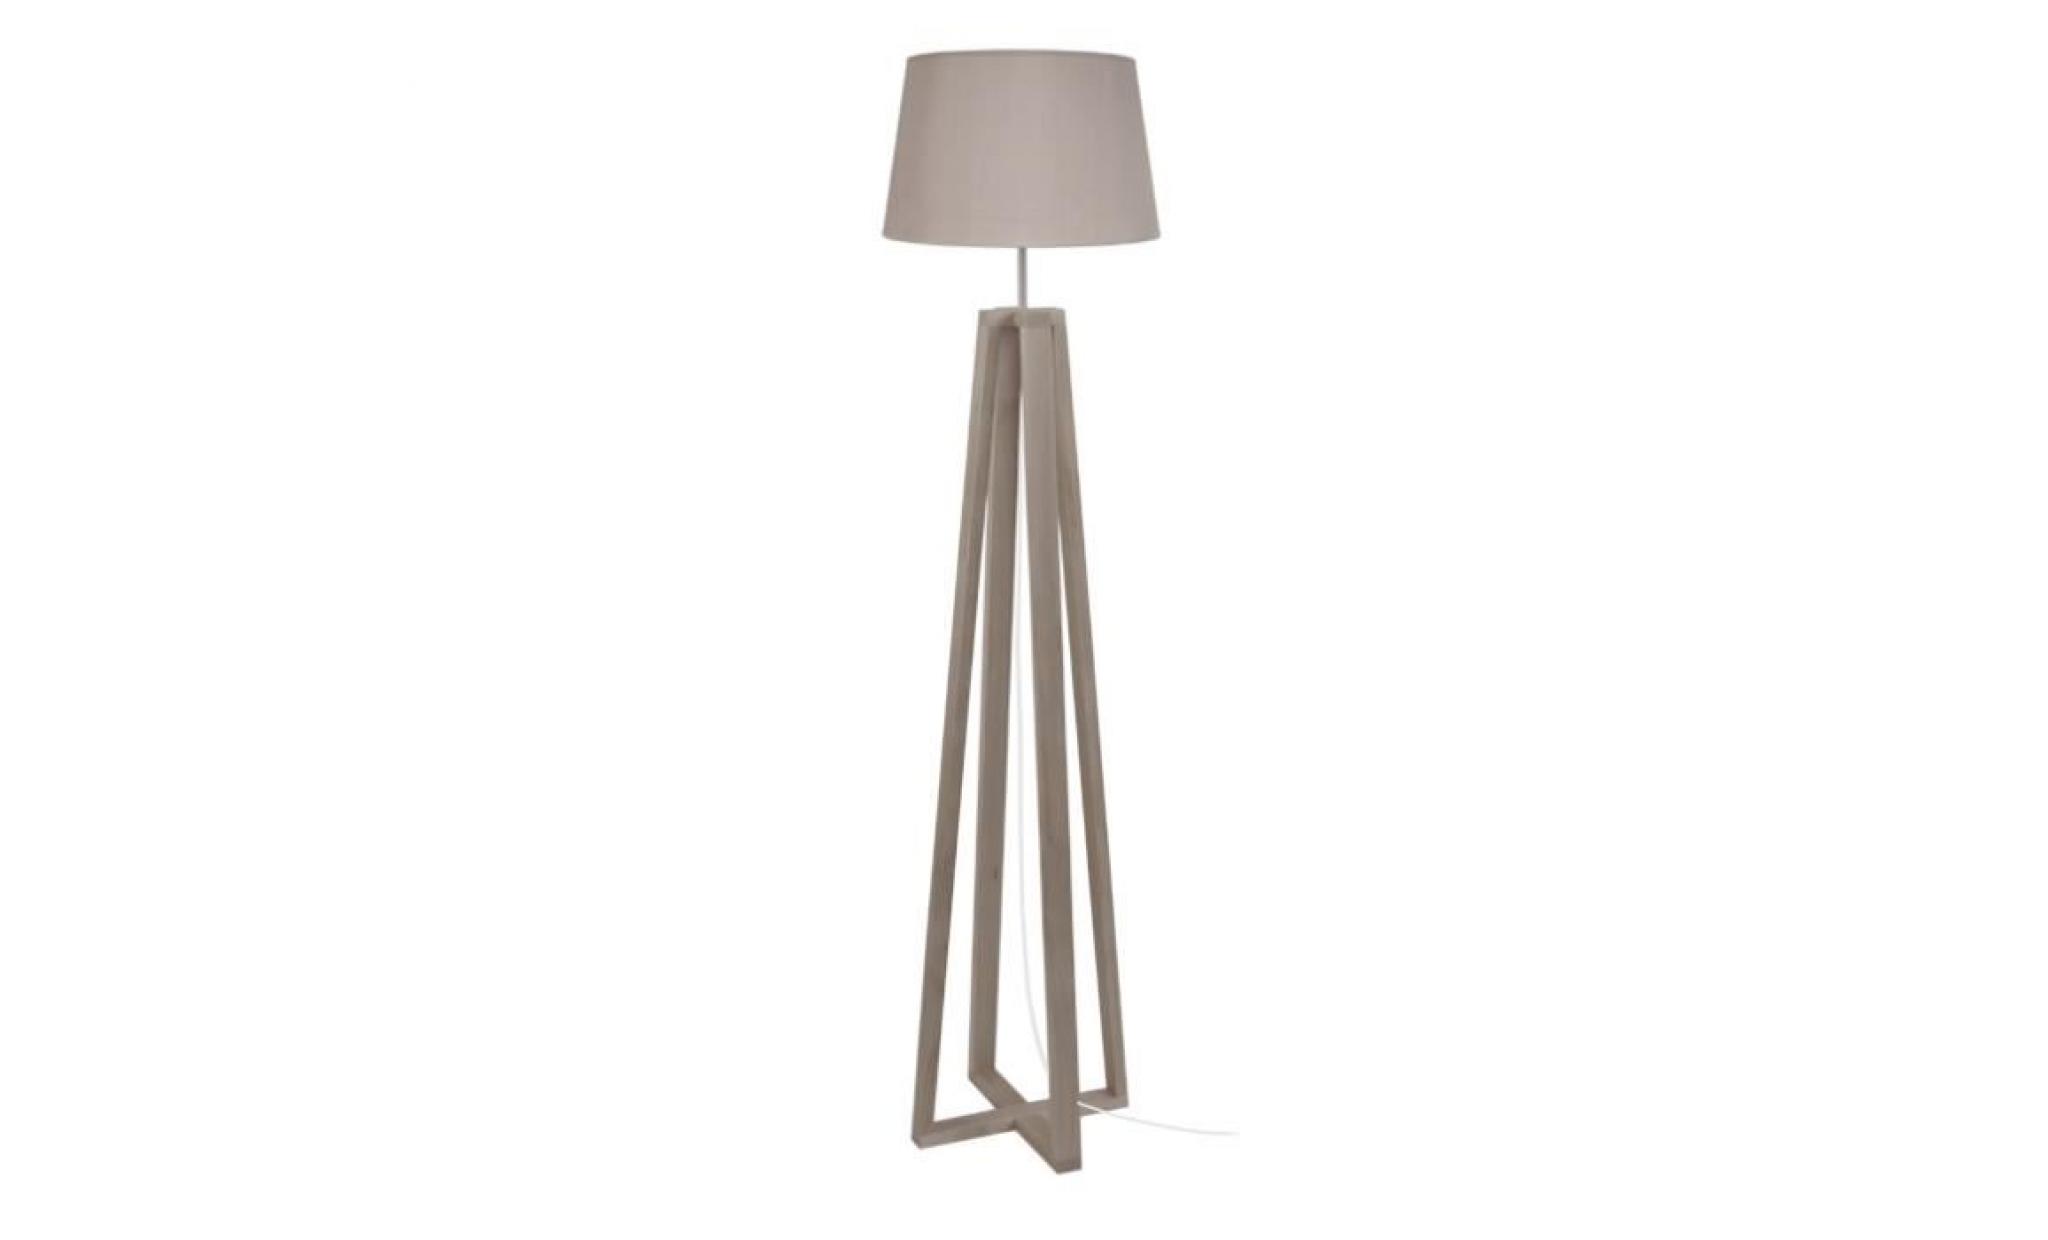 lampadaires linkÖping tosel taupe dimensions: 40 x 155 cmdouille: e27puissance: 40w